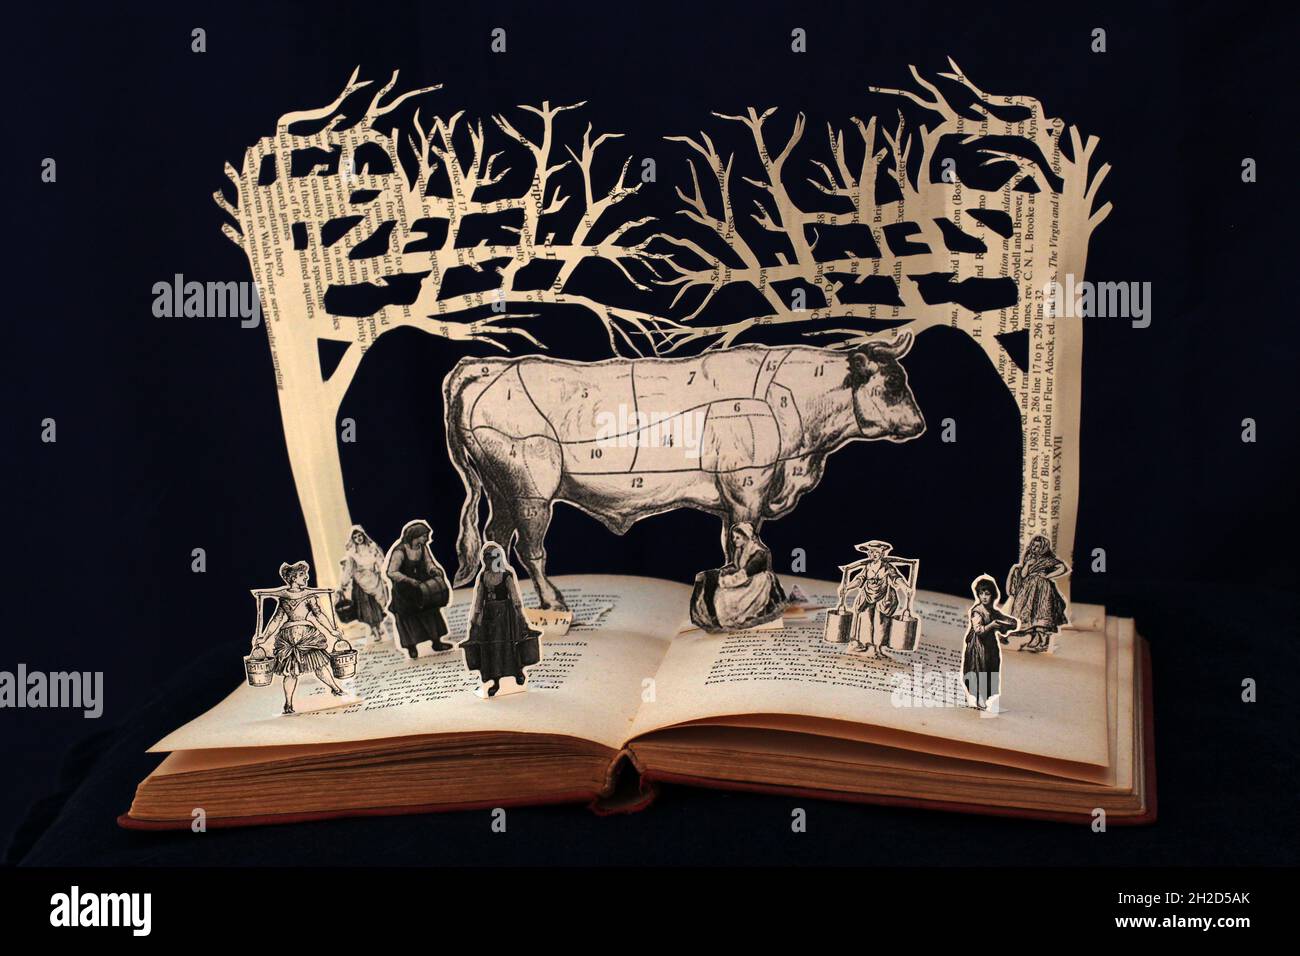 Paper book sculpture of eight maids a milking, a giant cow illustration surrounded by milkmaids. Stock Photo